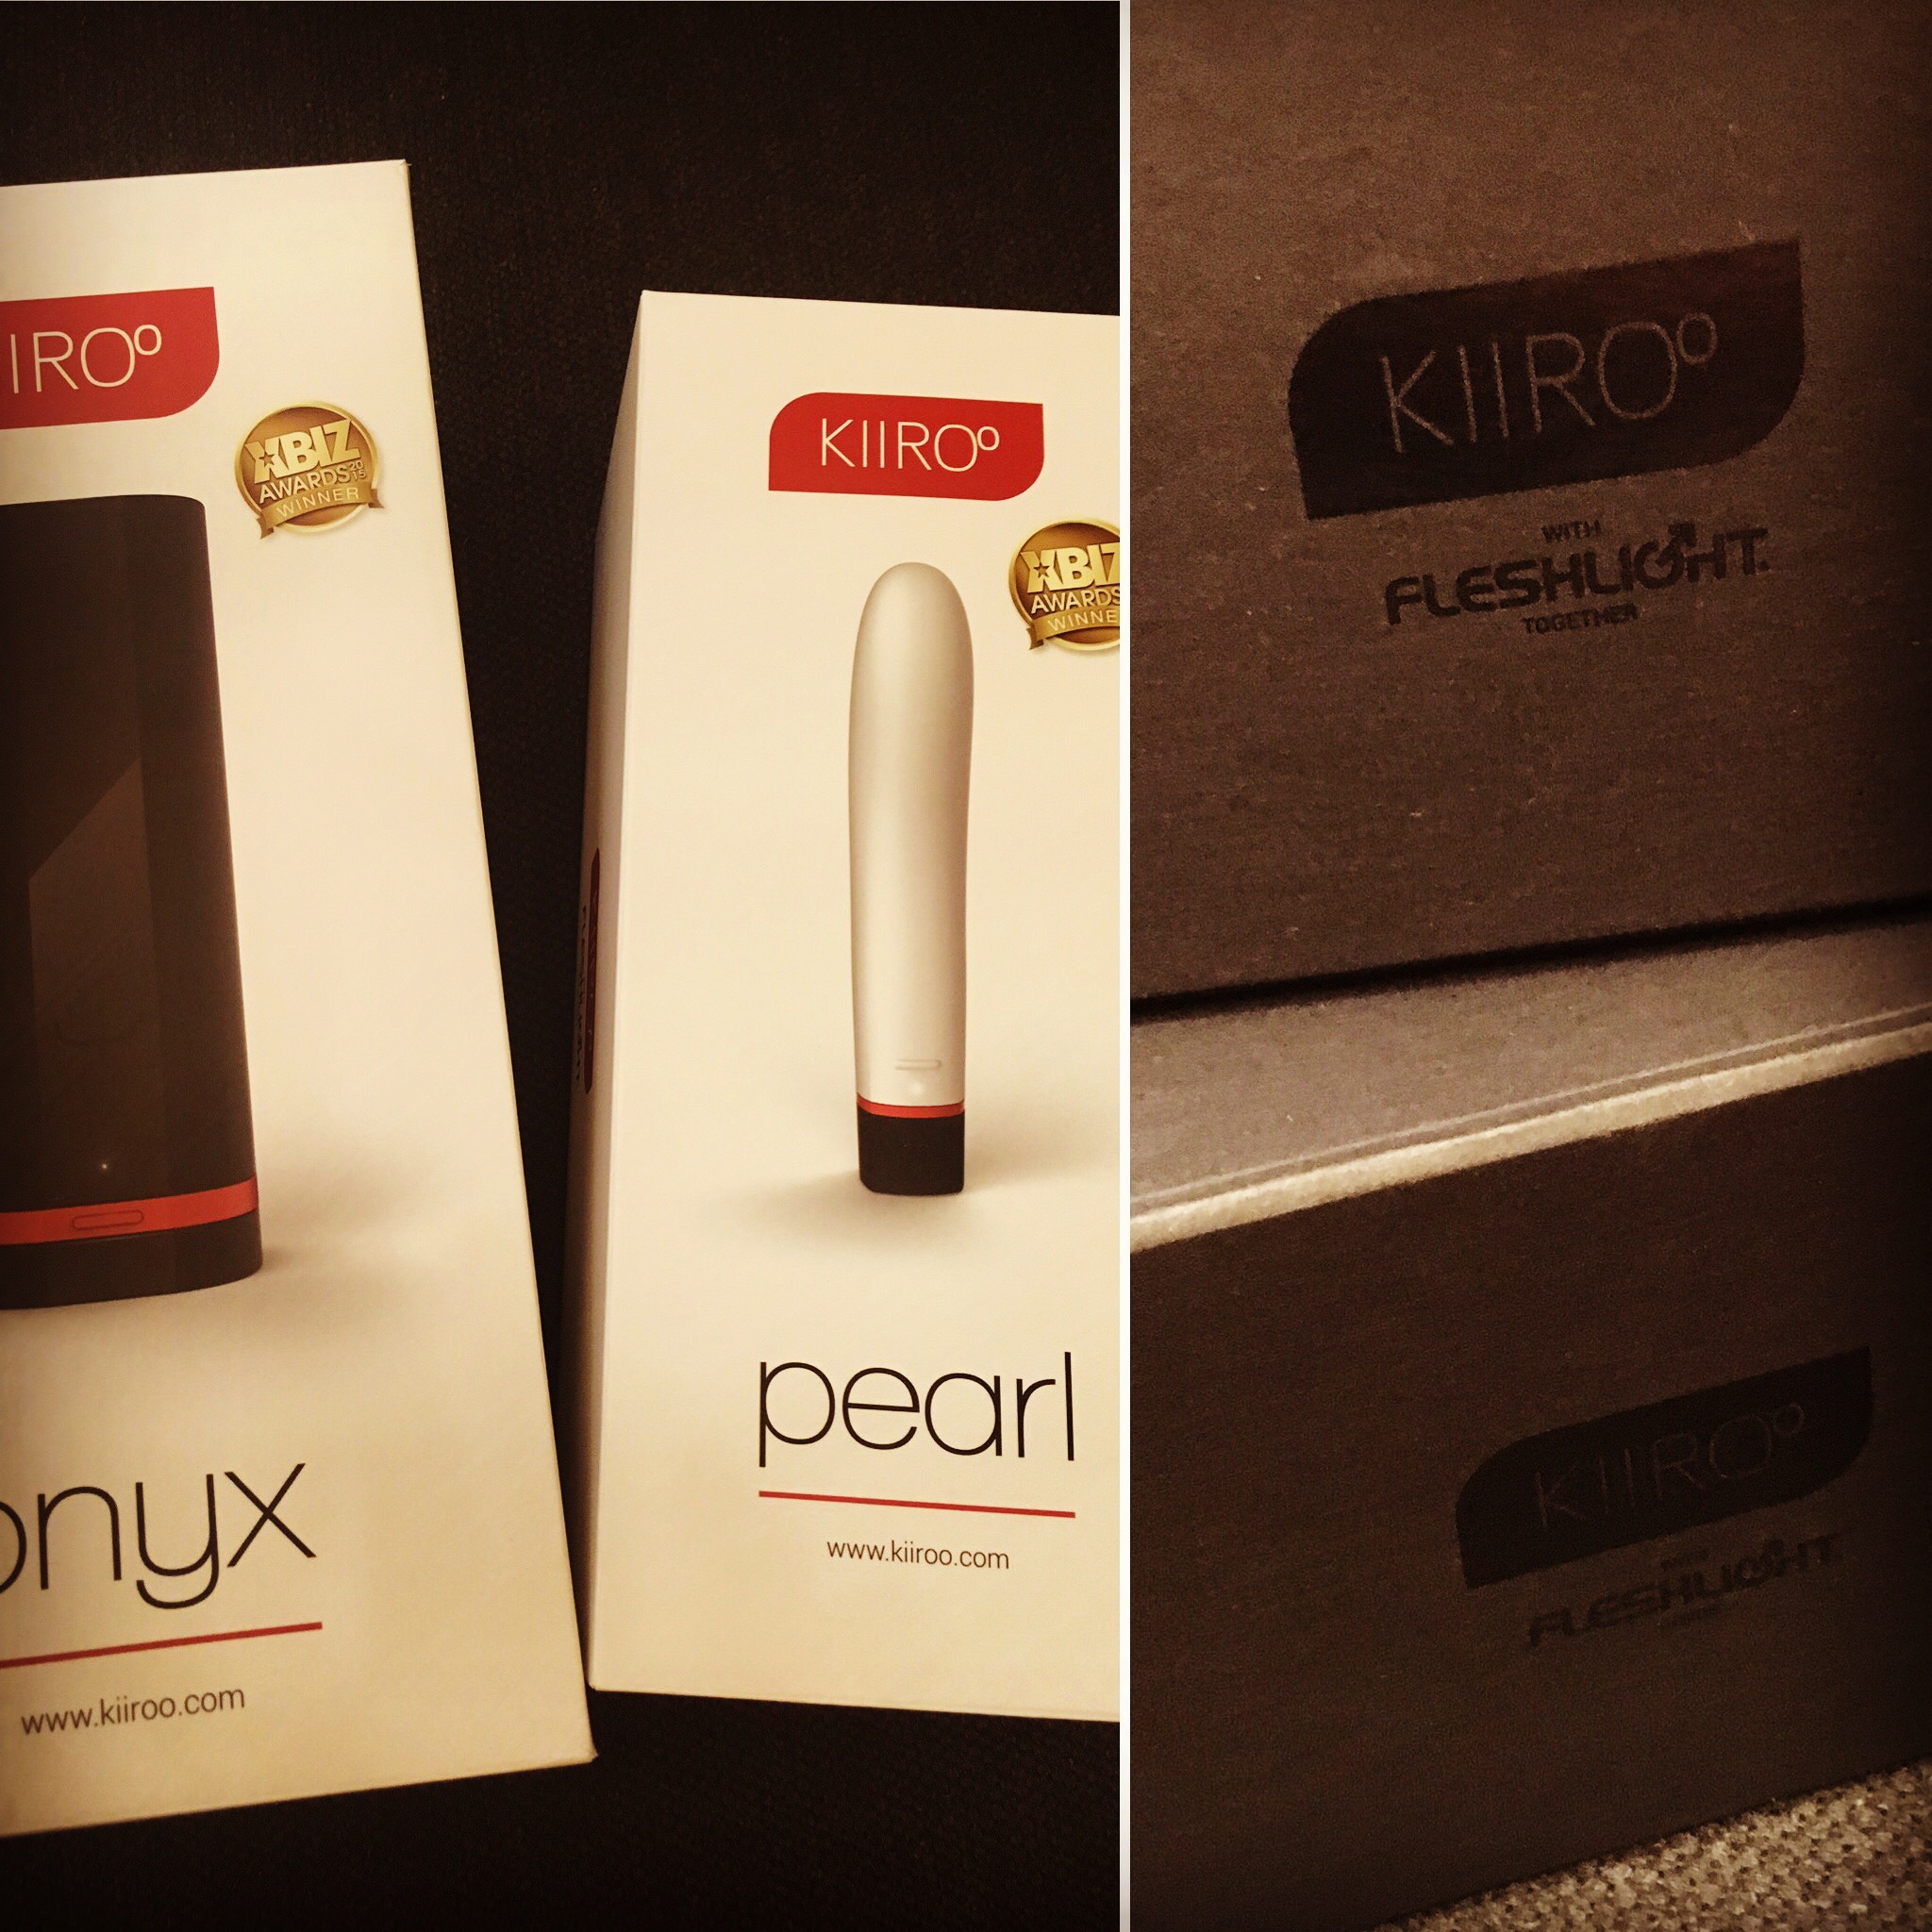 Kiiroo Review: Is It Really Worth the Money? Find Out Here